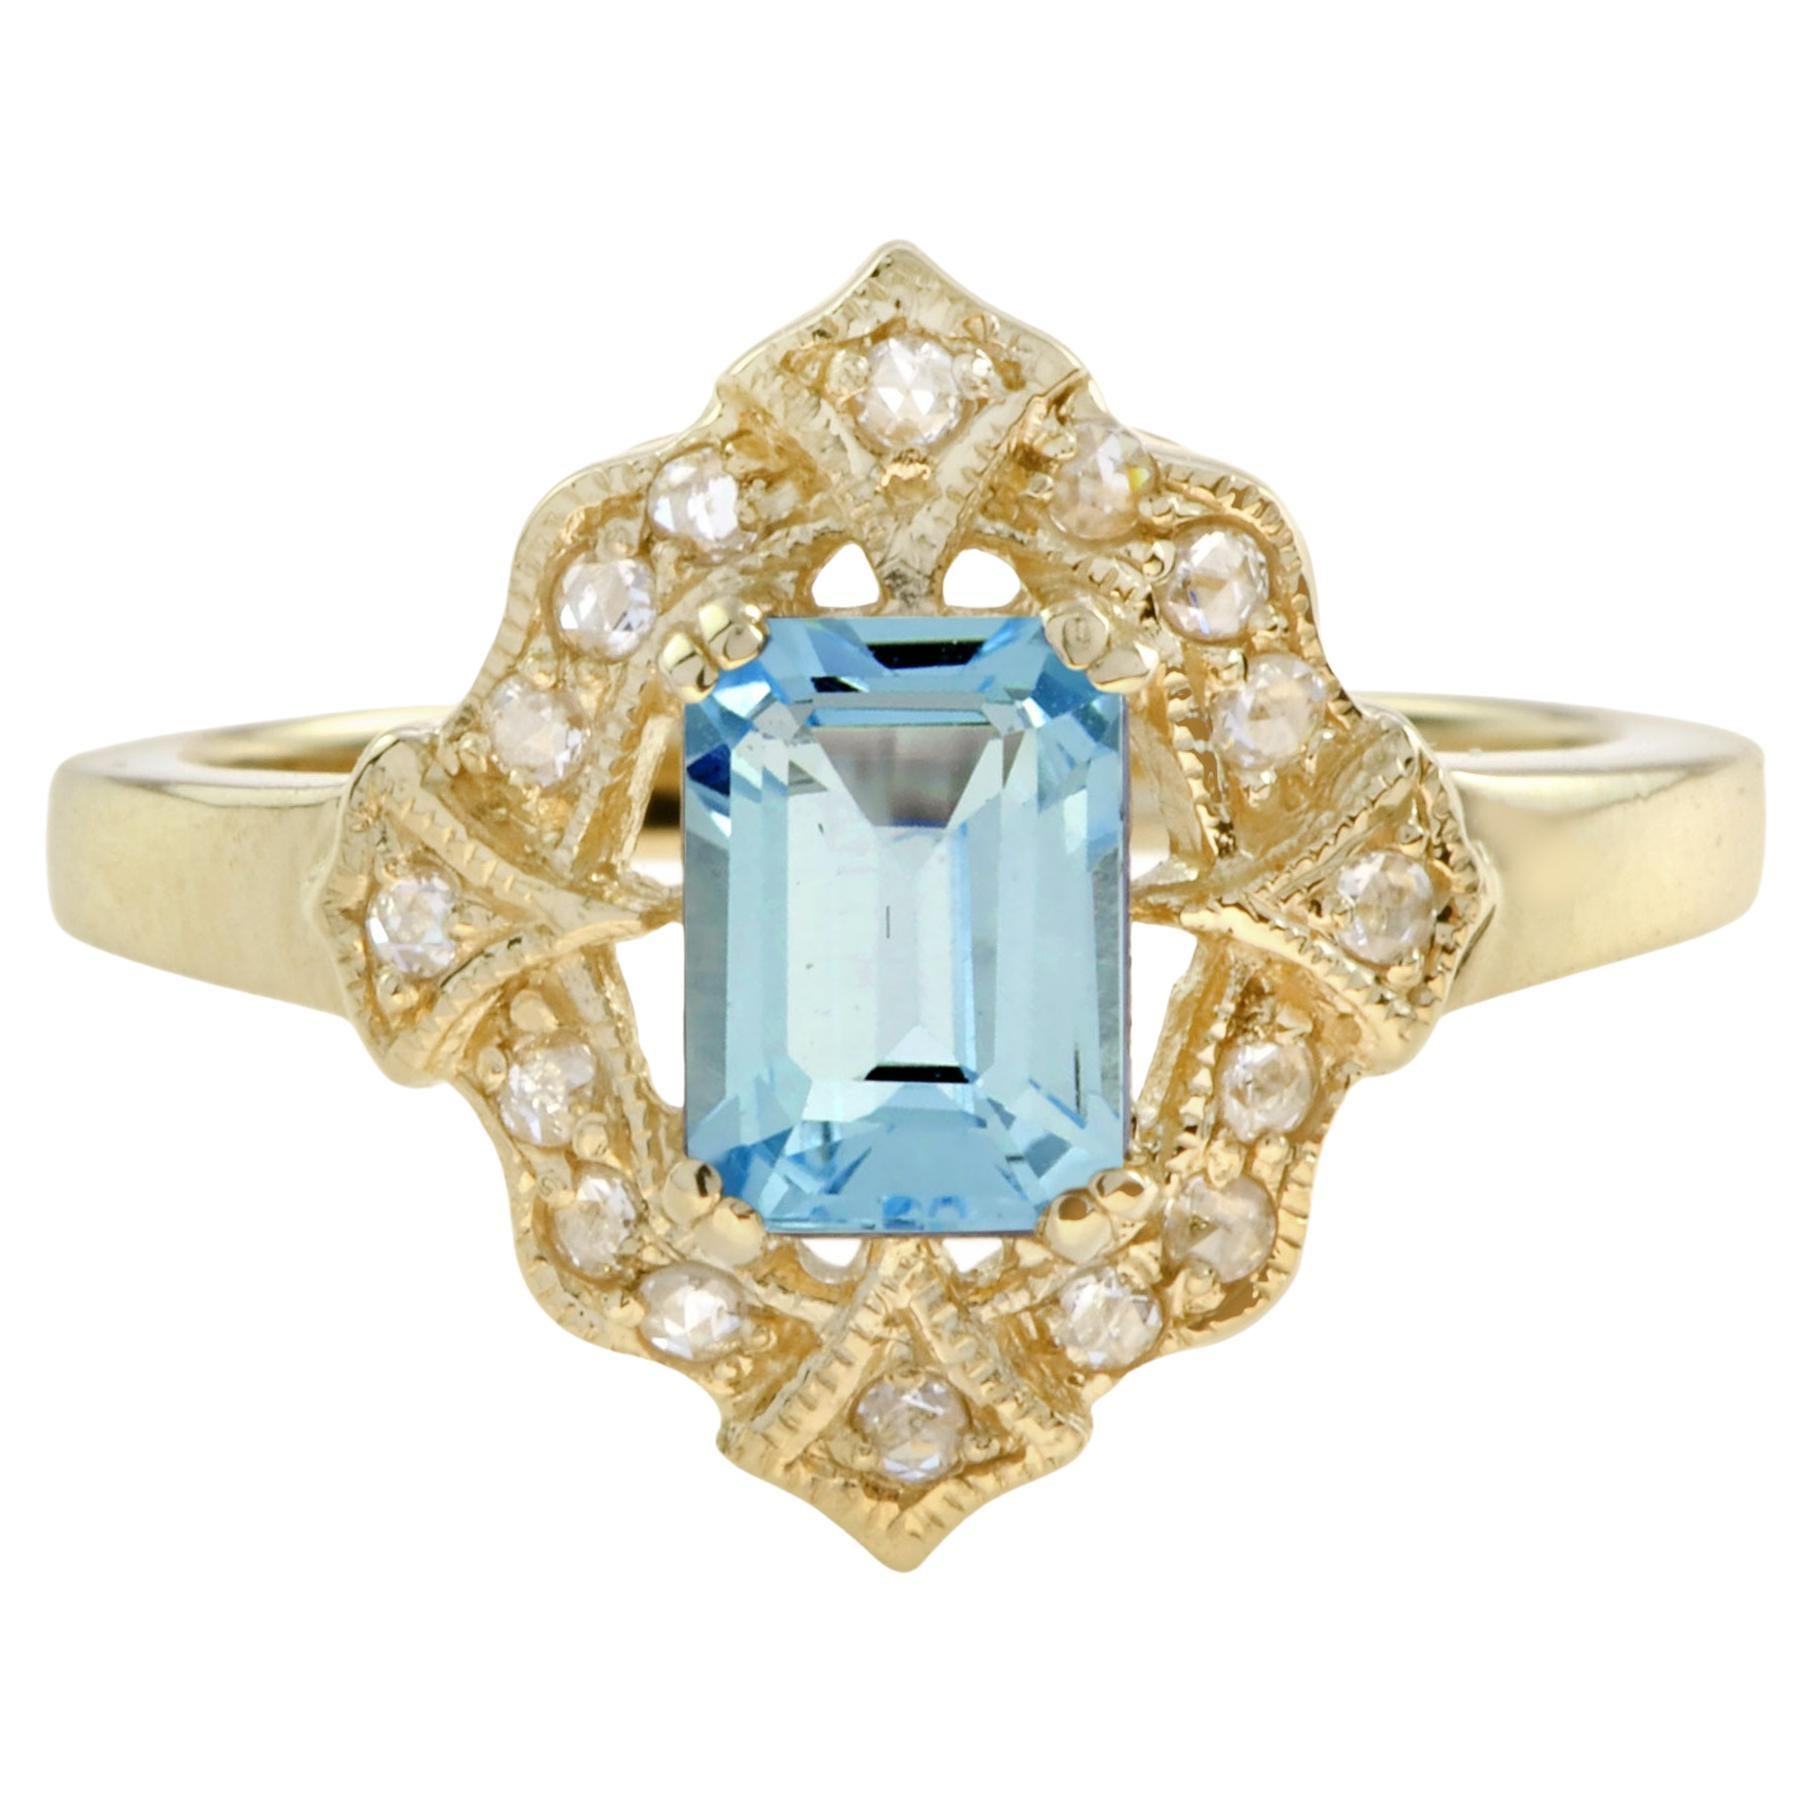 For Sale:  Emerald Cut Blue Topaz and Diamond Halo Vintage Style Ring in 14K Yellow Gold